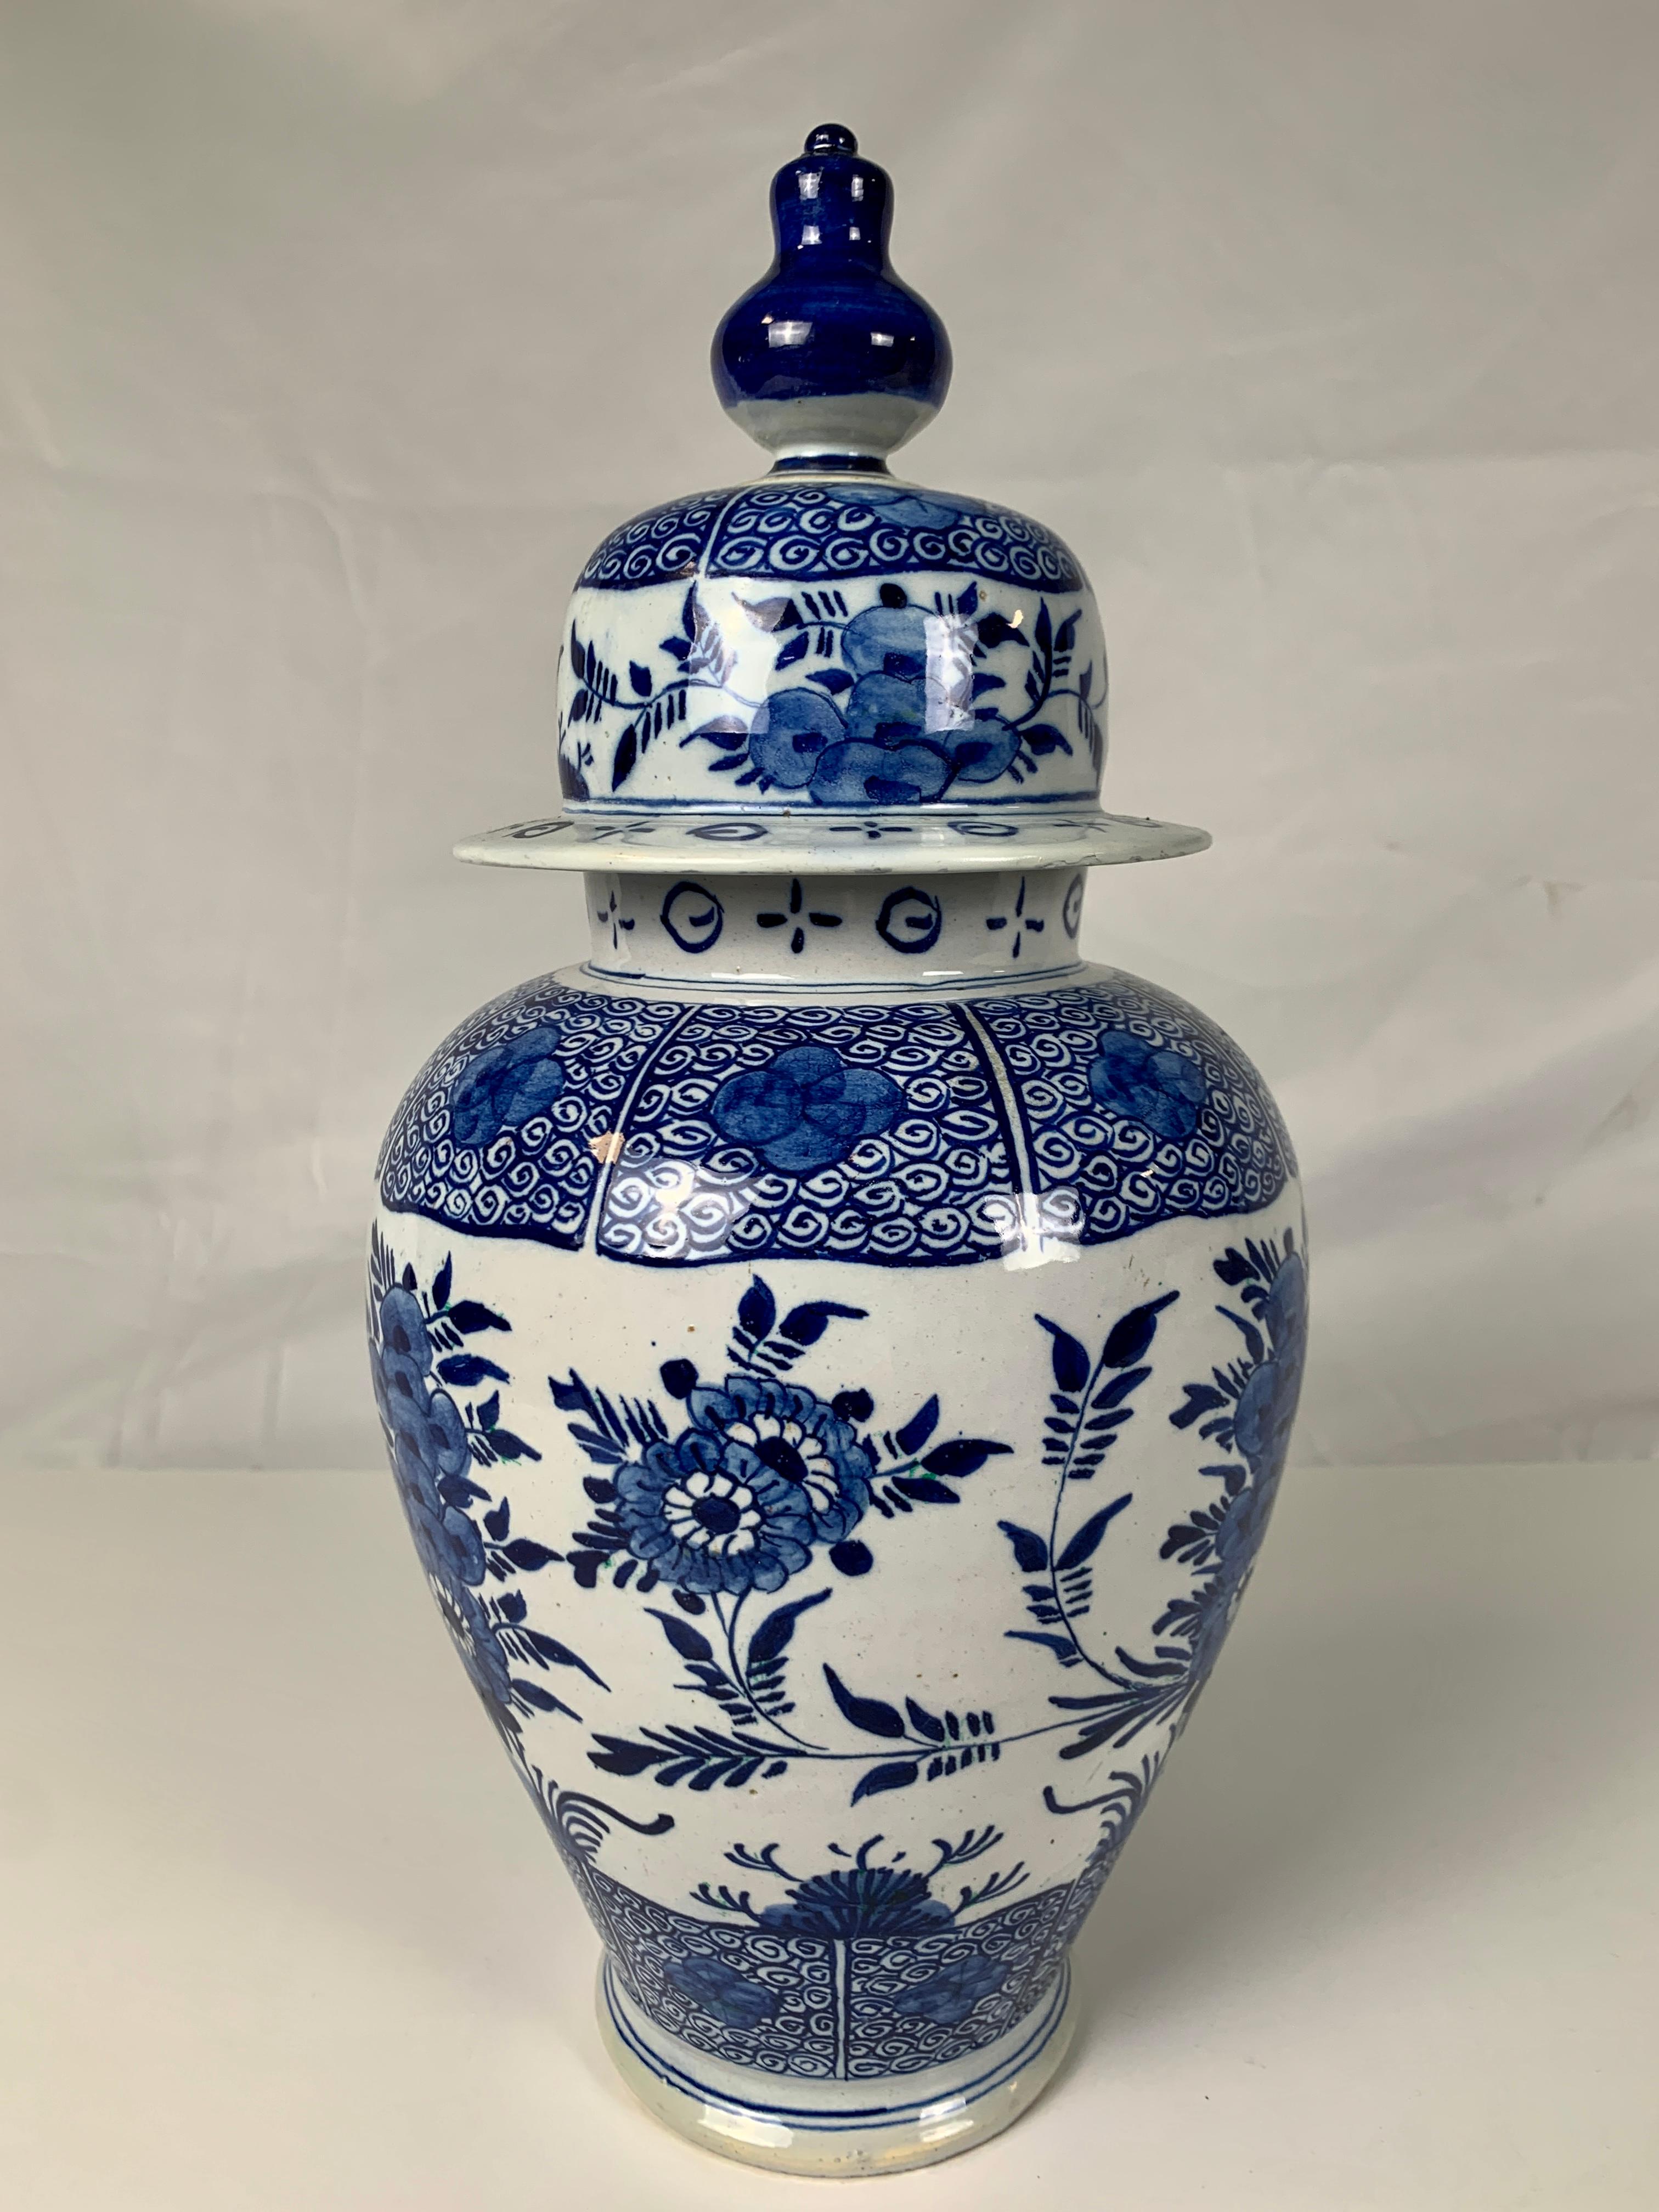 Group of Large Dutch Delft Jars and Vases 18th-19th and 20th Centuries 8